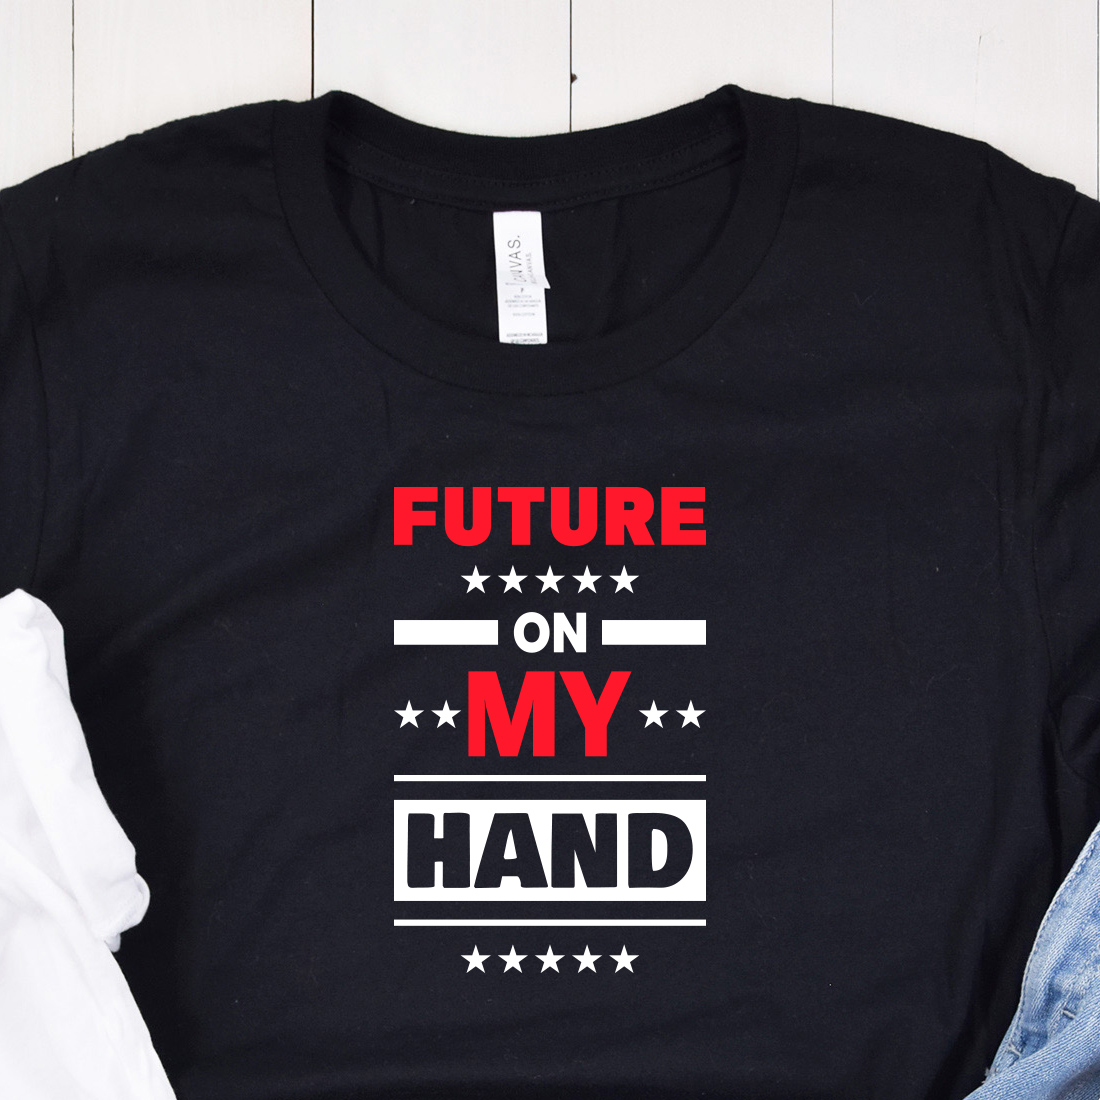 Image of a black t-shirt with a charming "future on my hand" lettering in red and white colors.